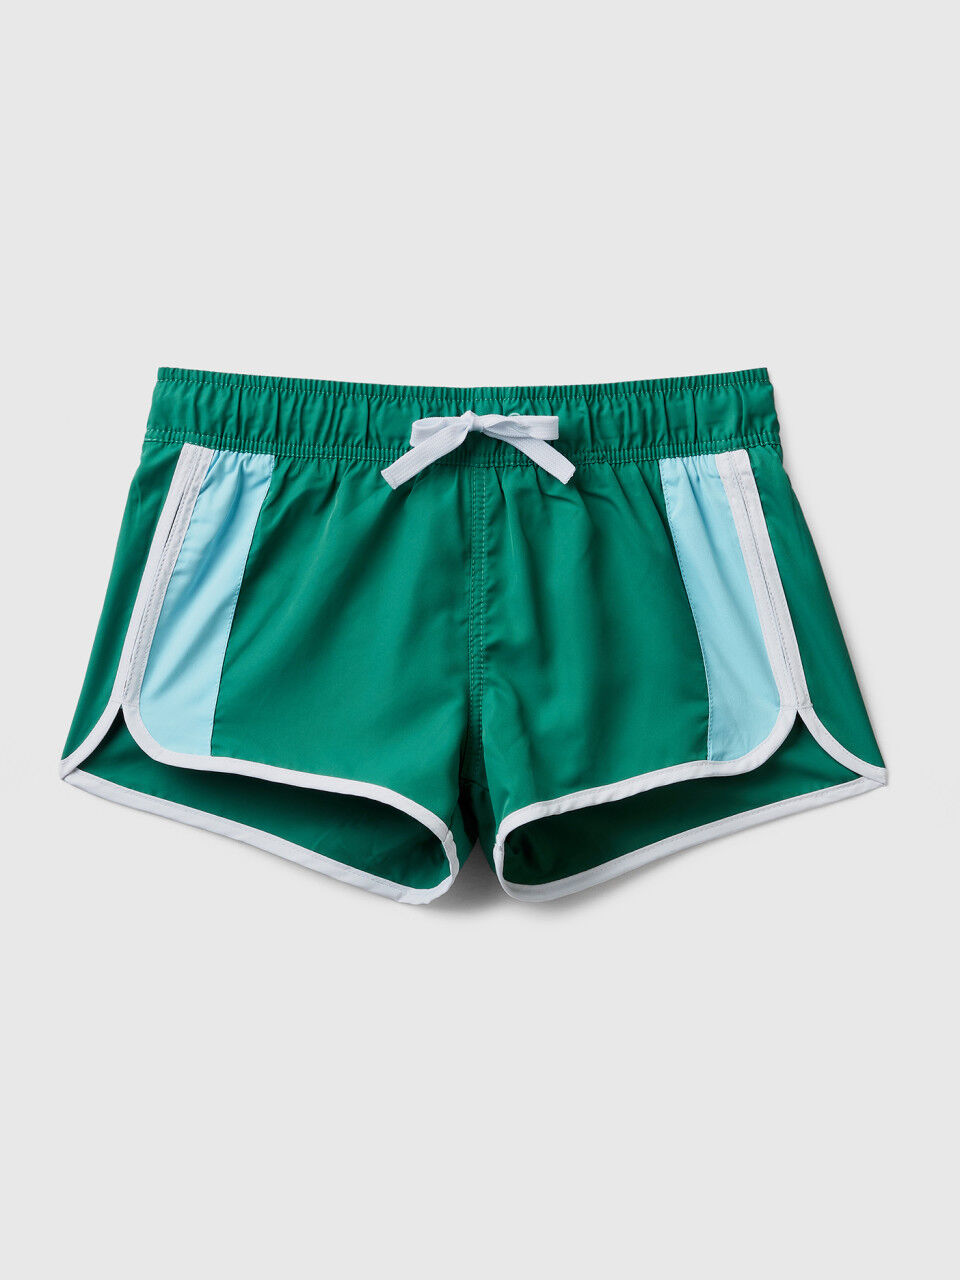 Swim trunks with side bands